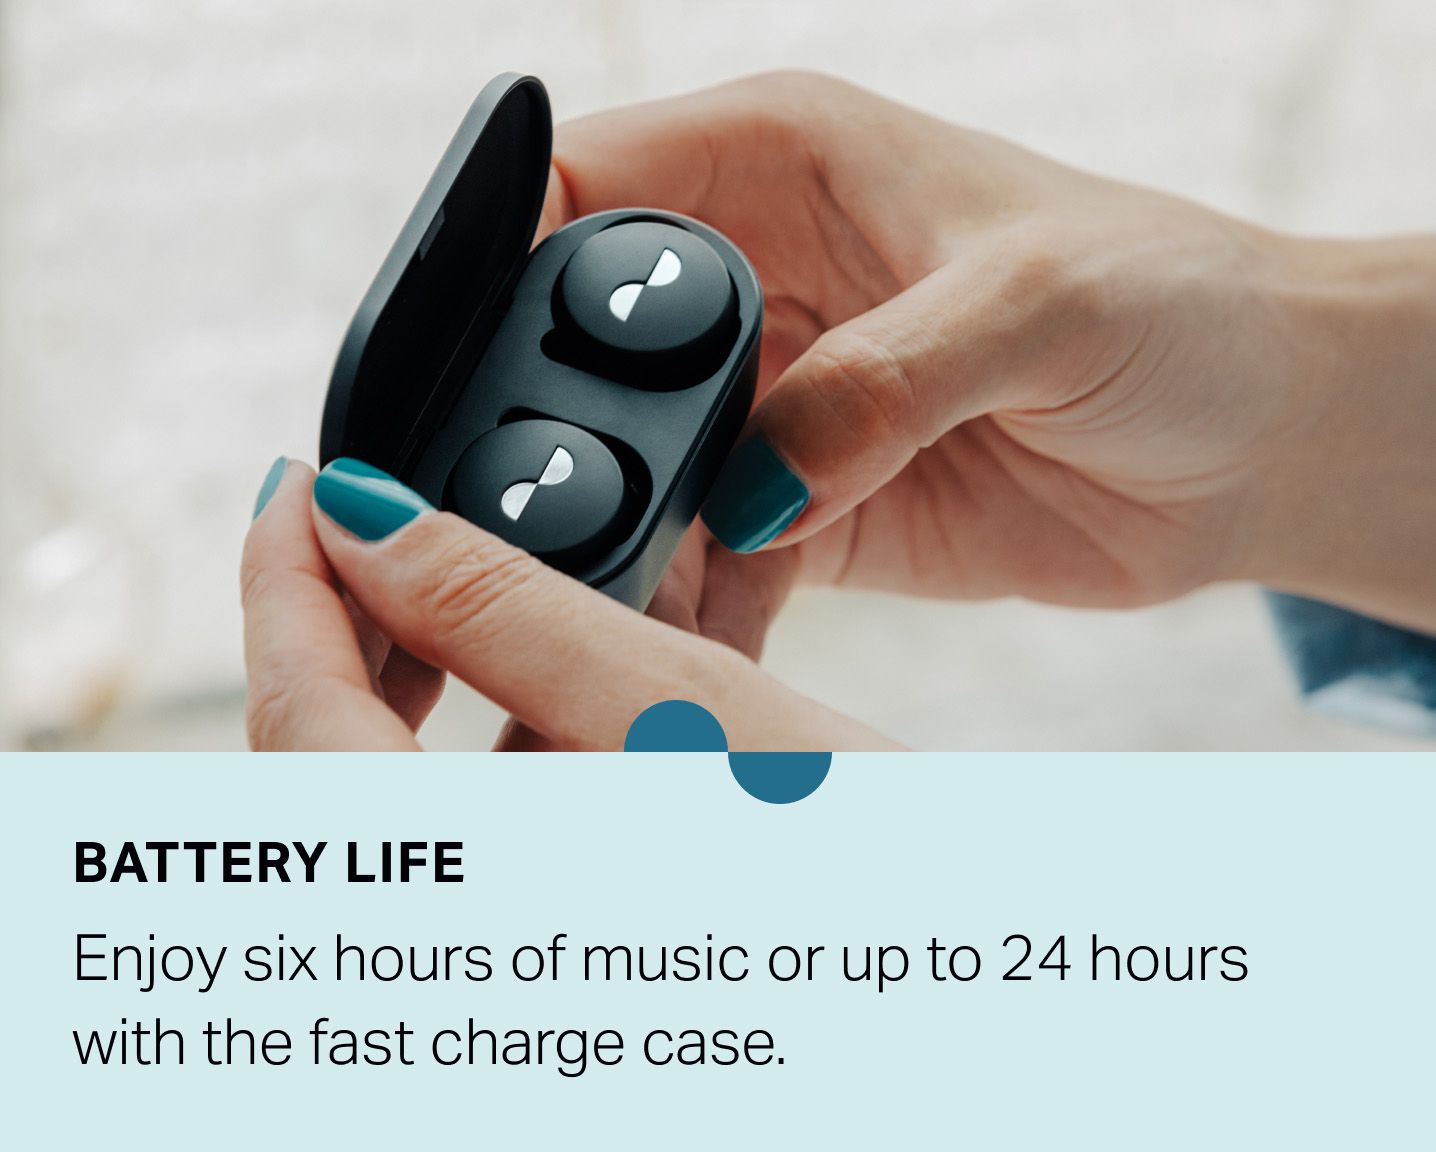 Person holding NURATRUE earbuds in fast charge case — "Battery life: Enjoy six hours of music or up to 24 hours with the fast charge case."